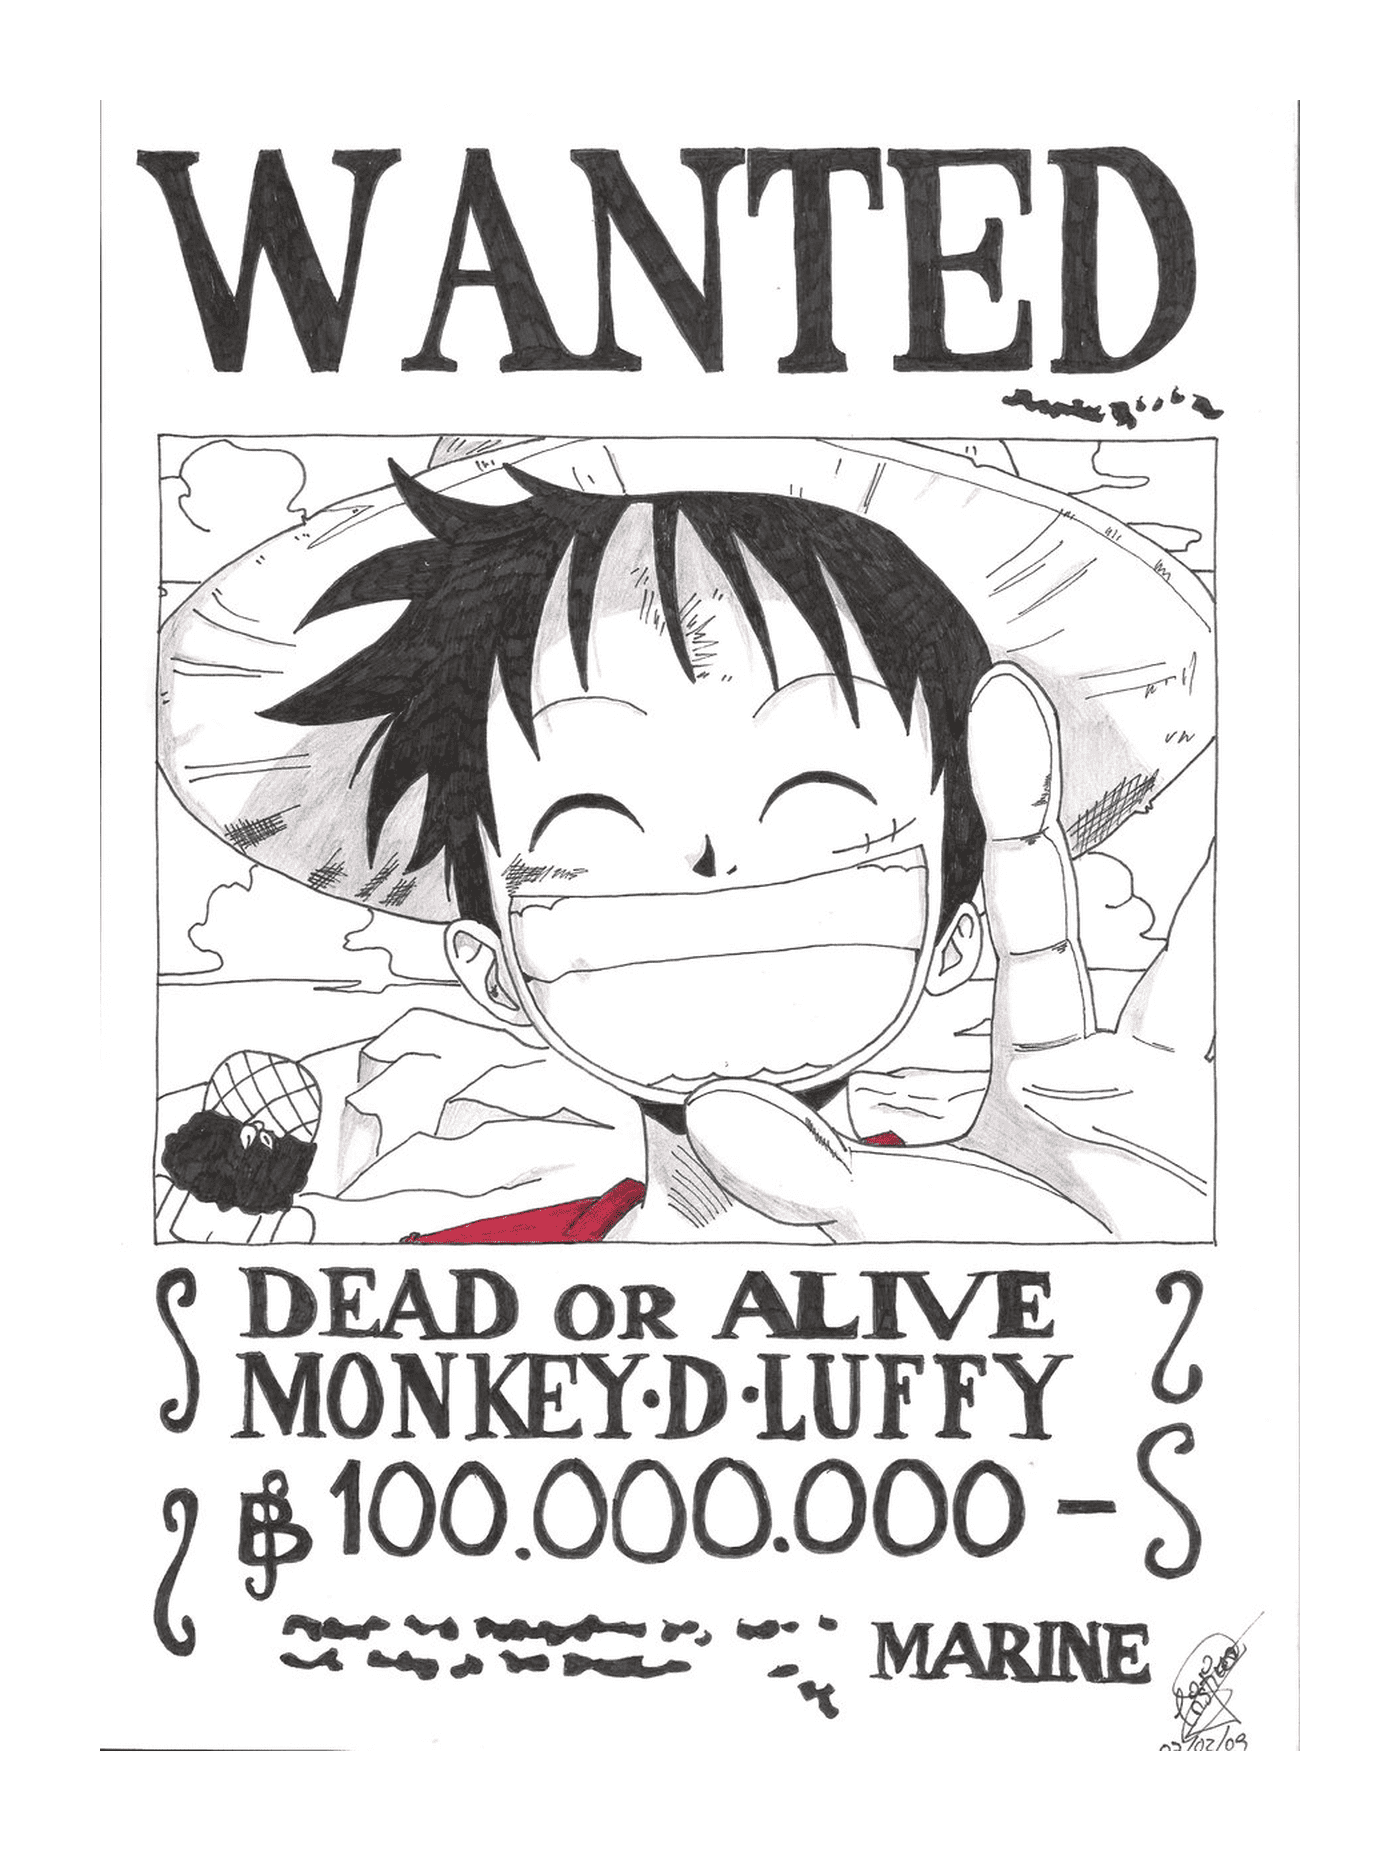  Wanted Luffy by Rikku, dead or alive 